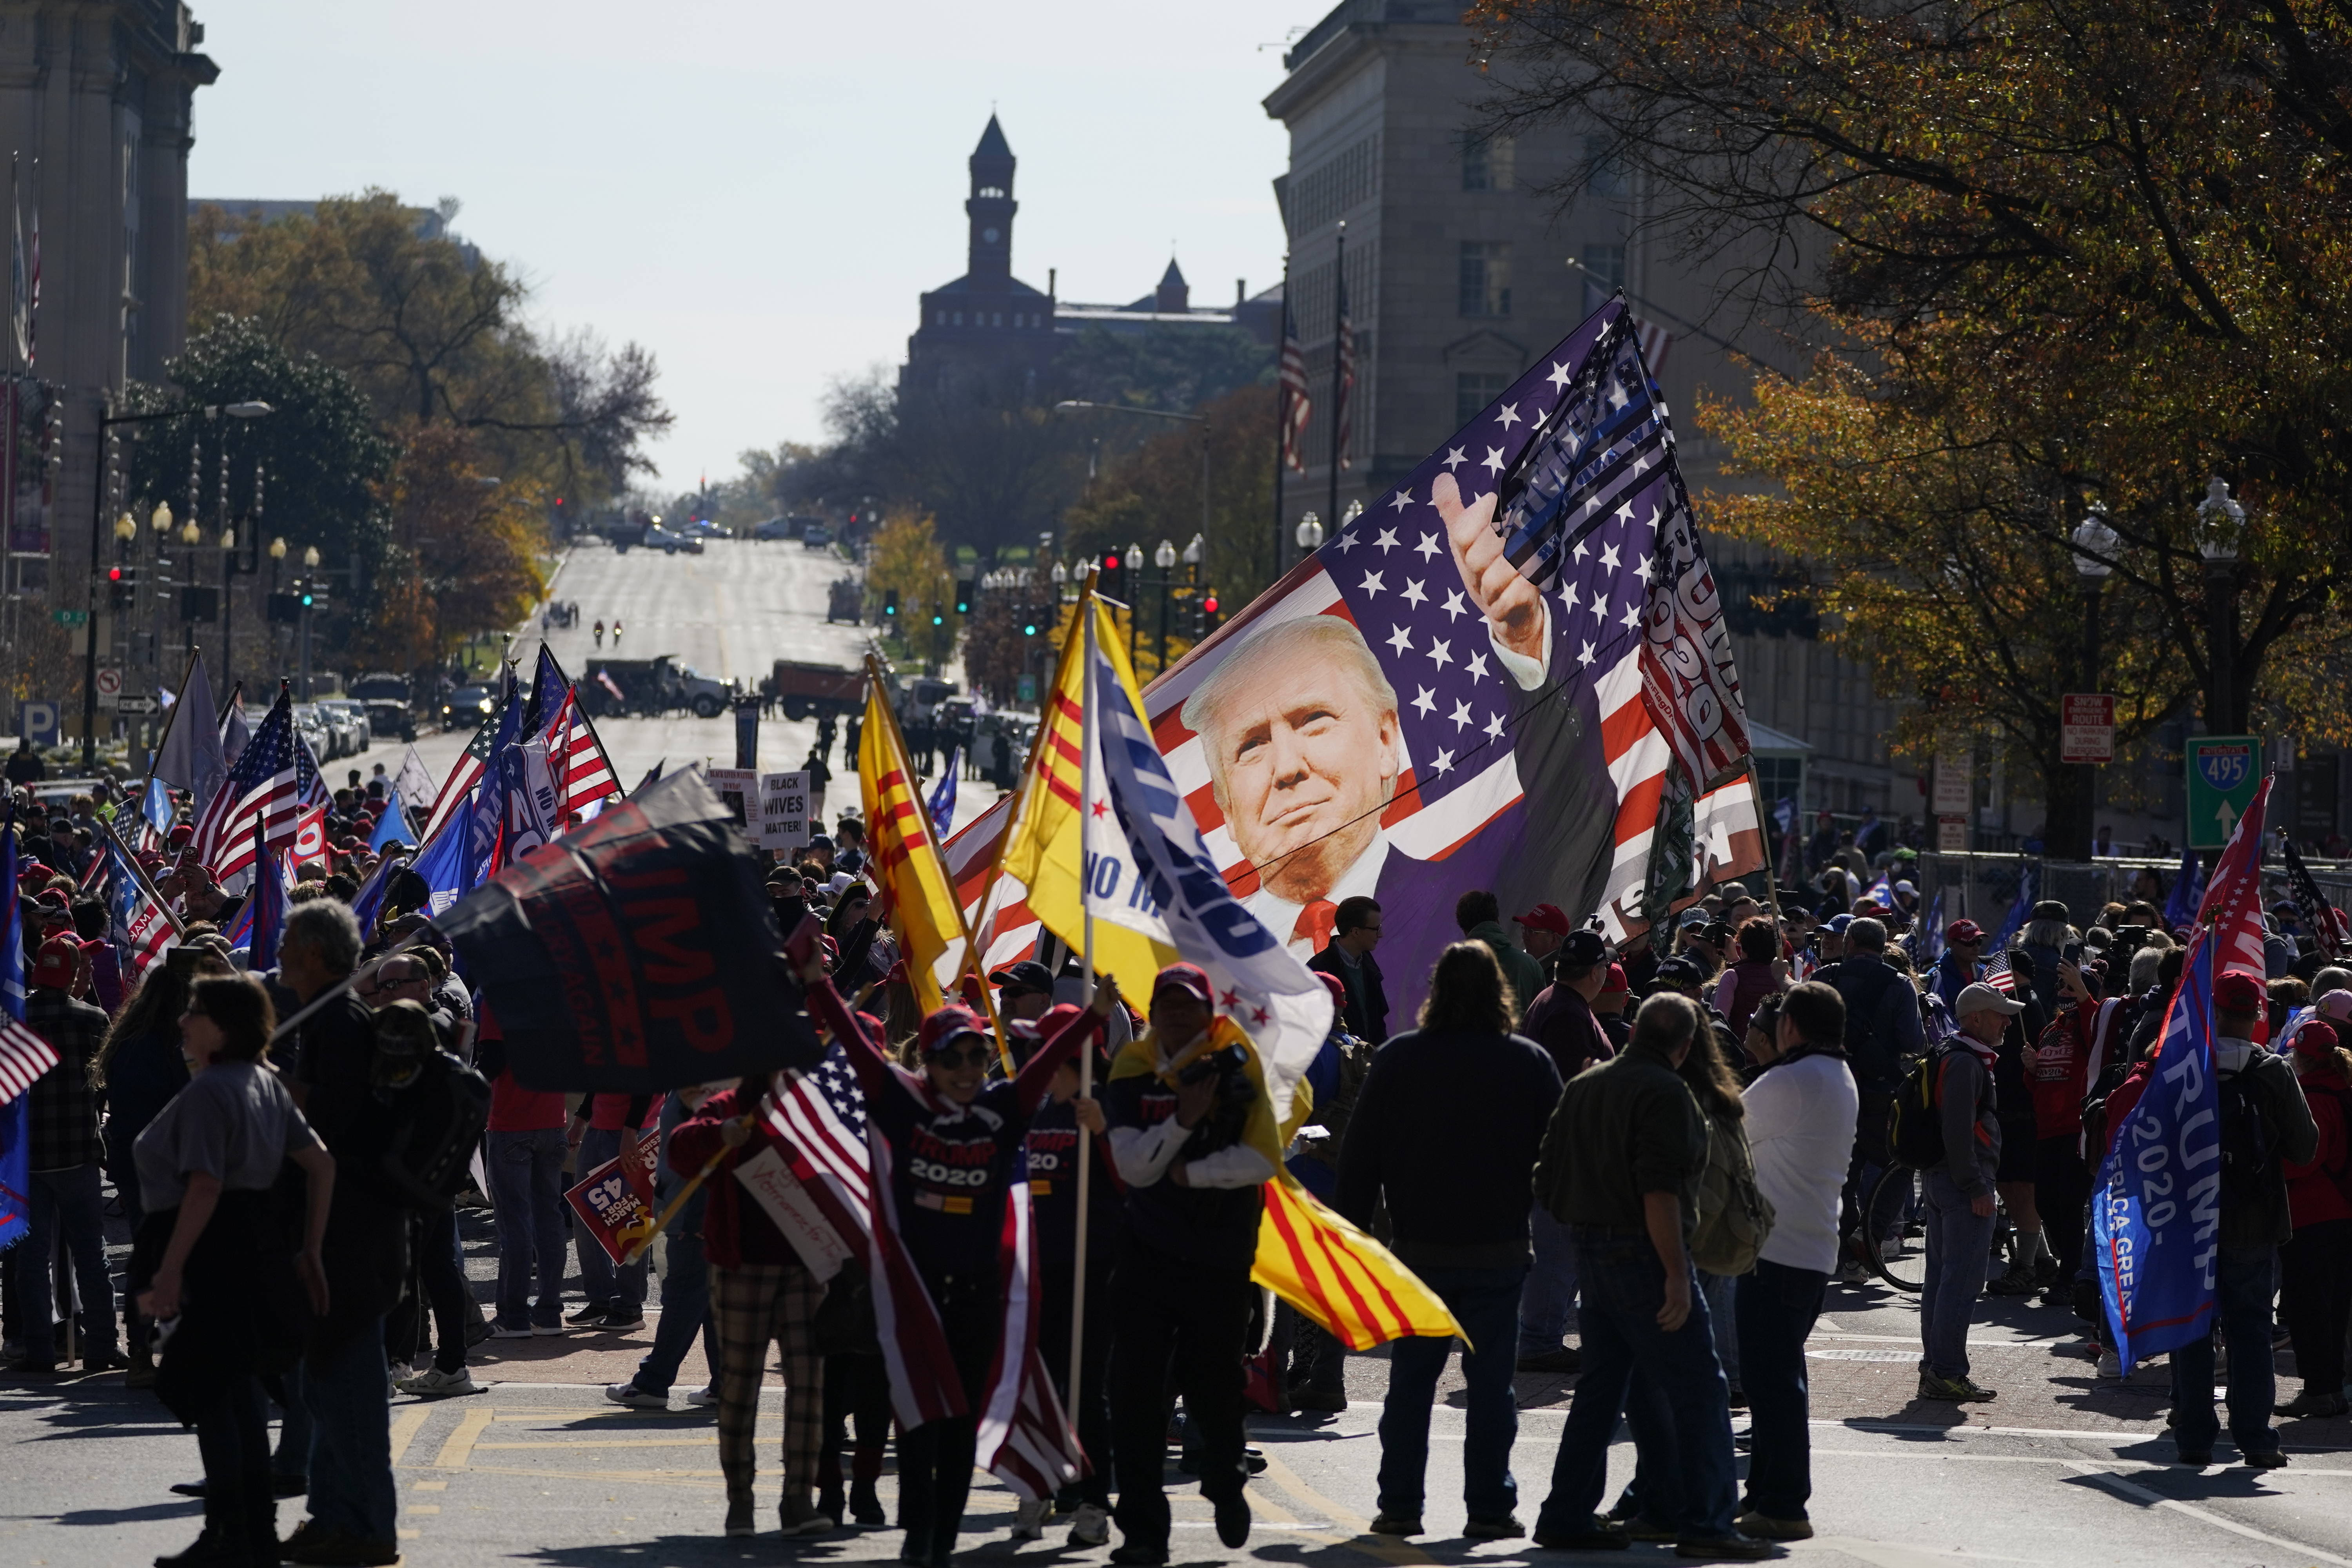 Supporters of President Trump rally on Saturday in Washington, D.C. (Julio Cortez/AP)